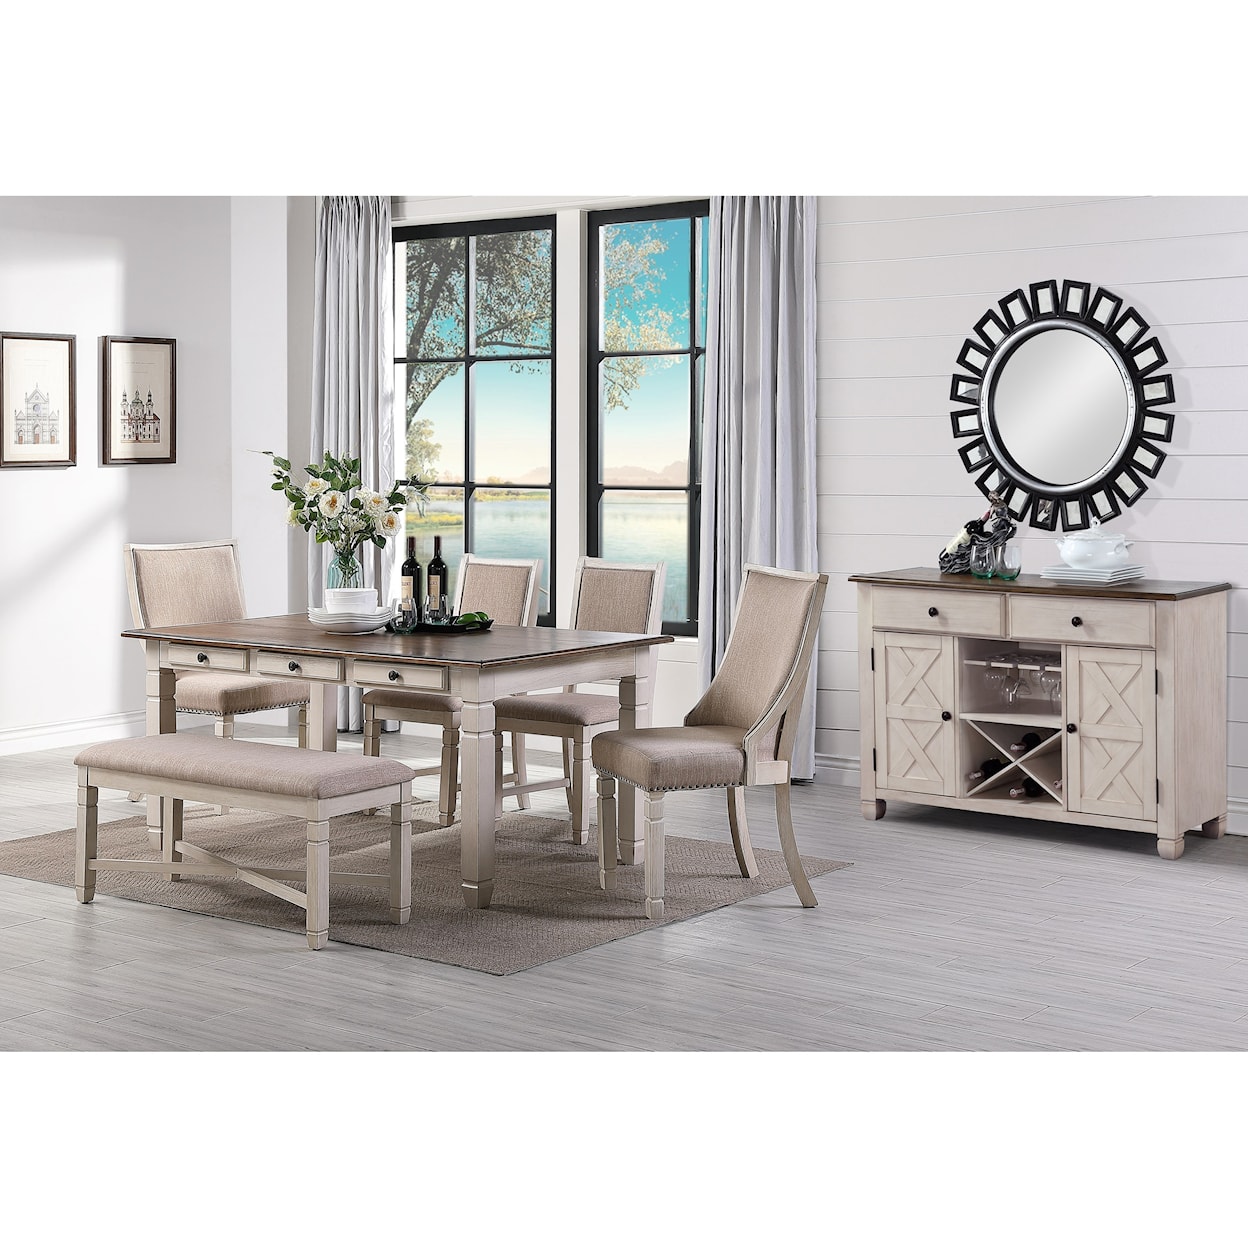 New Classic Furniture Prairie Point Dining Room Group